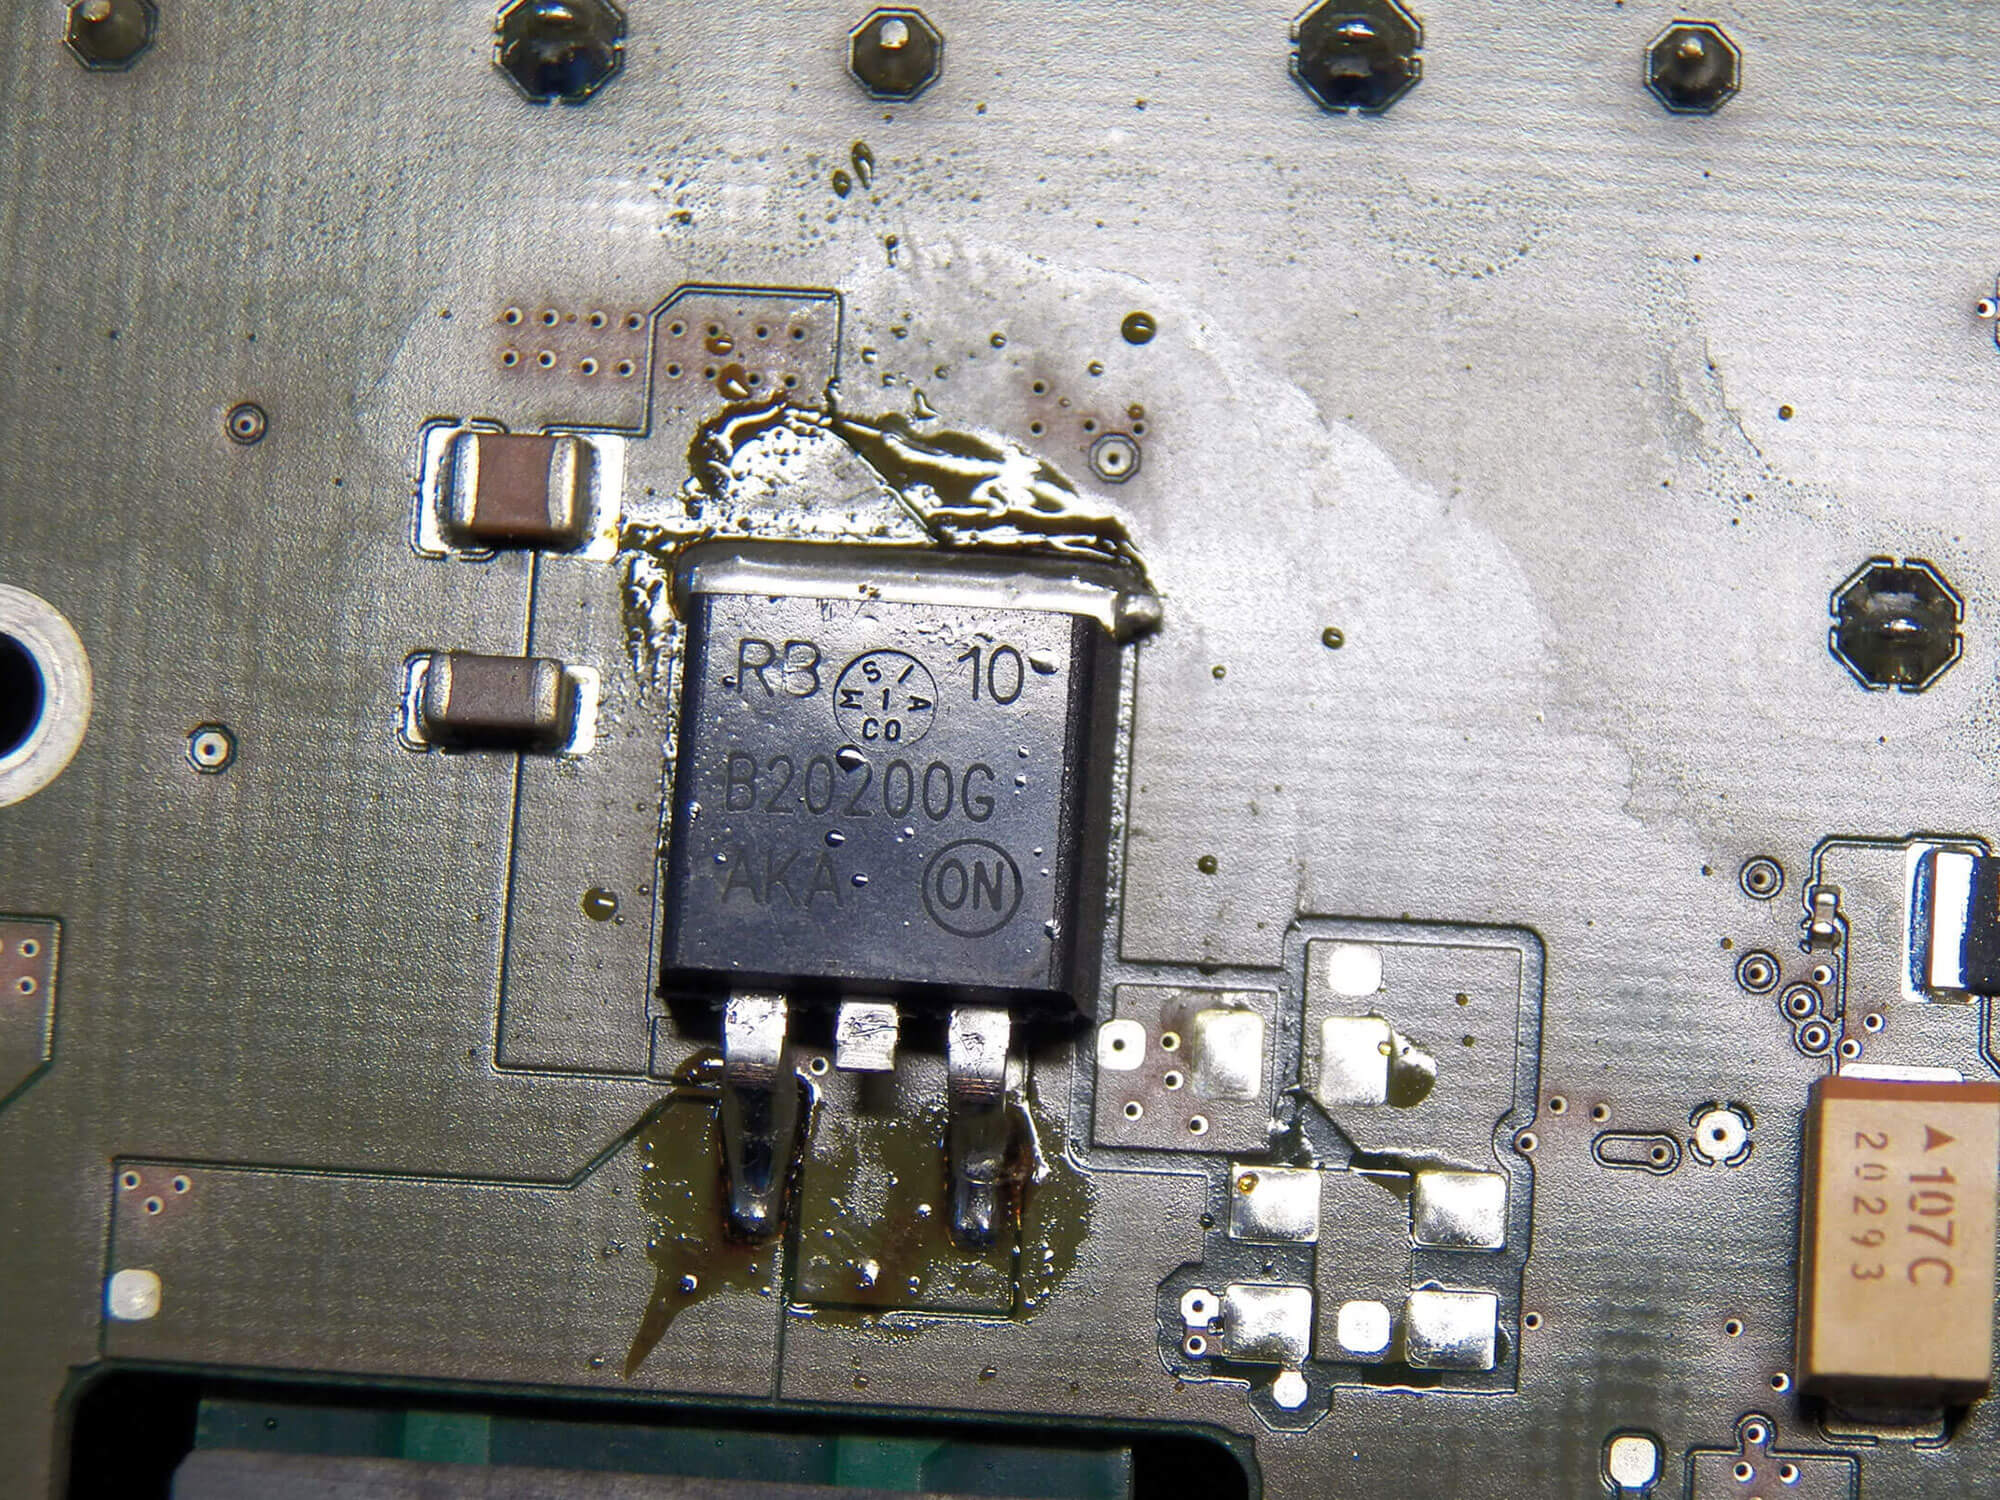 Soldering joint, that has not been cleaned, is damaging the surface of the circuit board – failure is imminent!